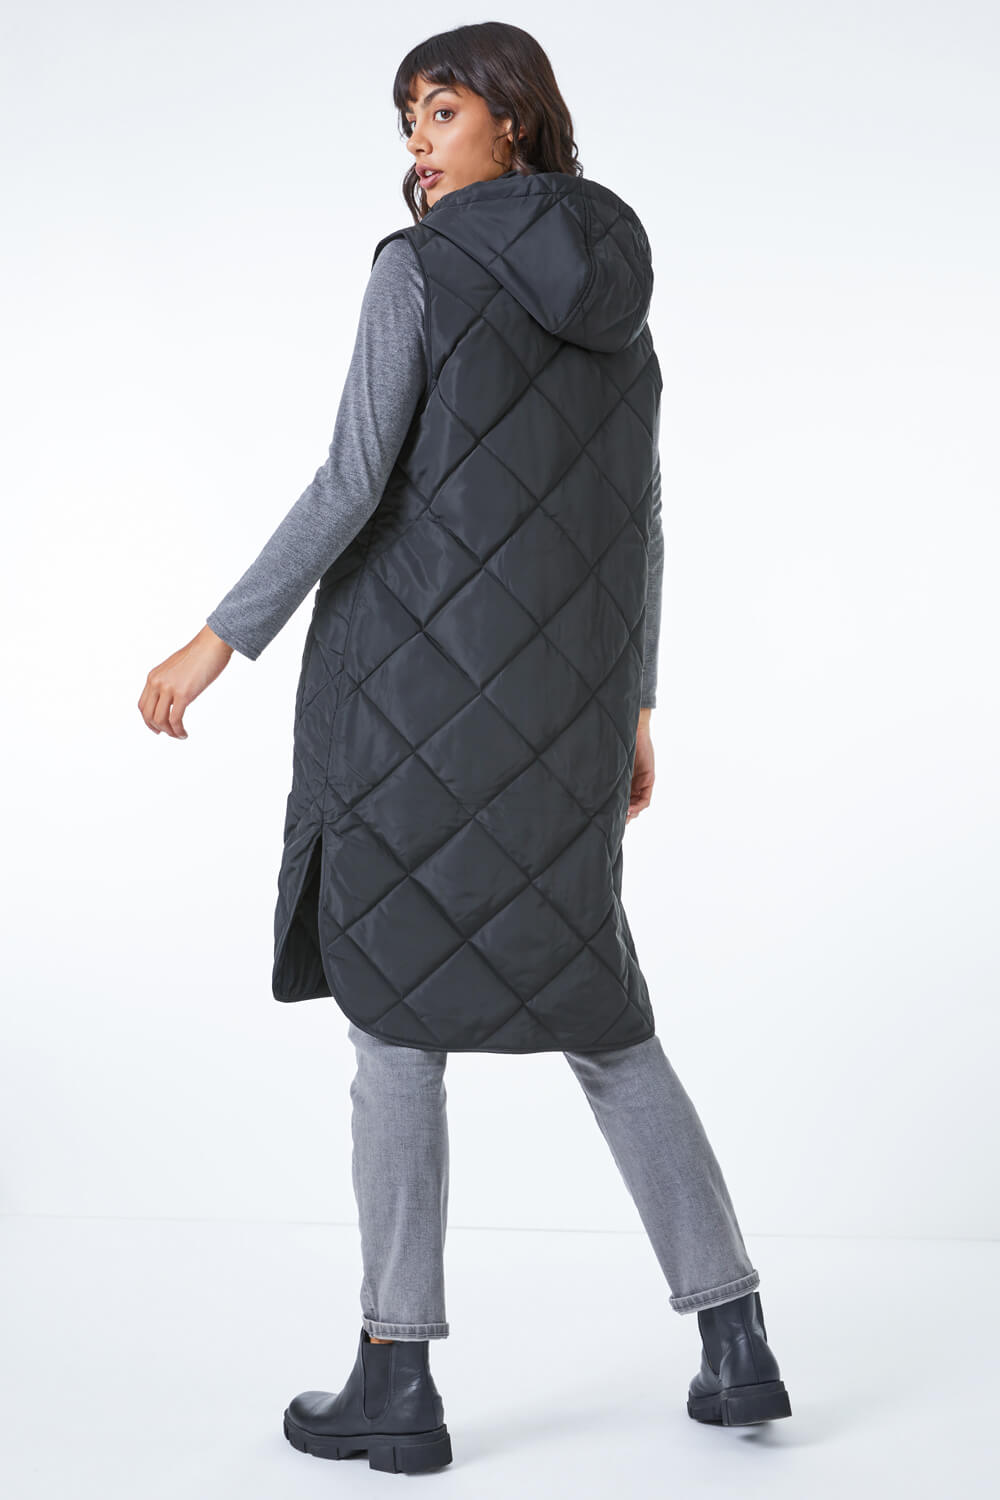 Black Quilted Longline Hooded Gilet , Image 2 of 6